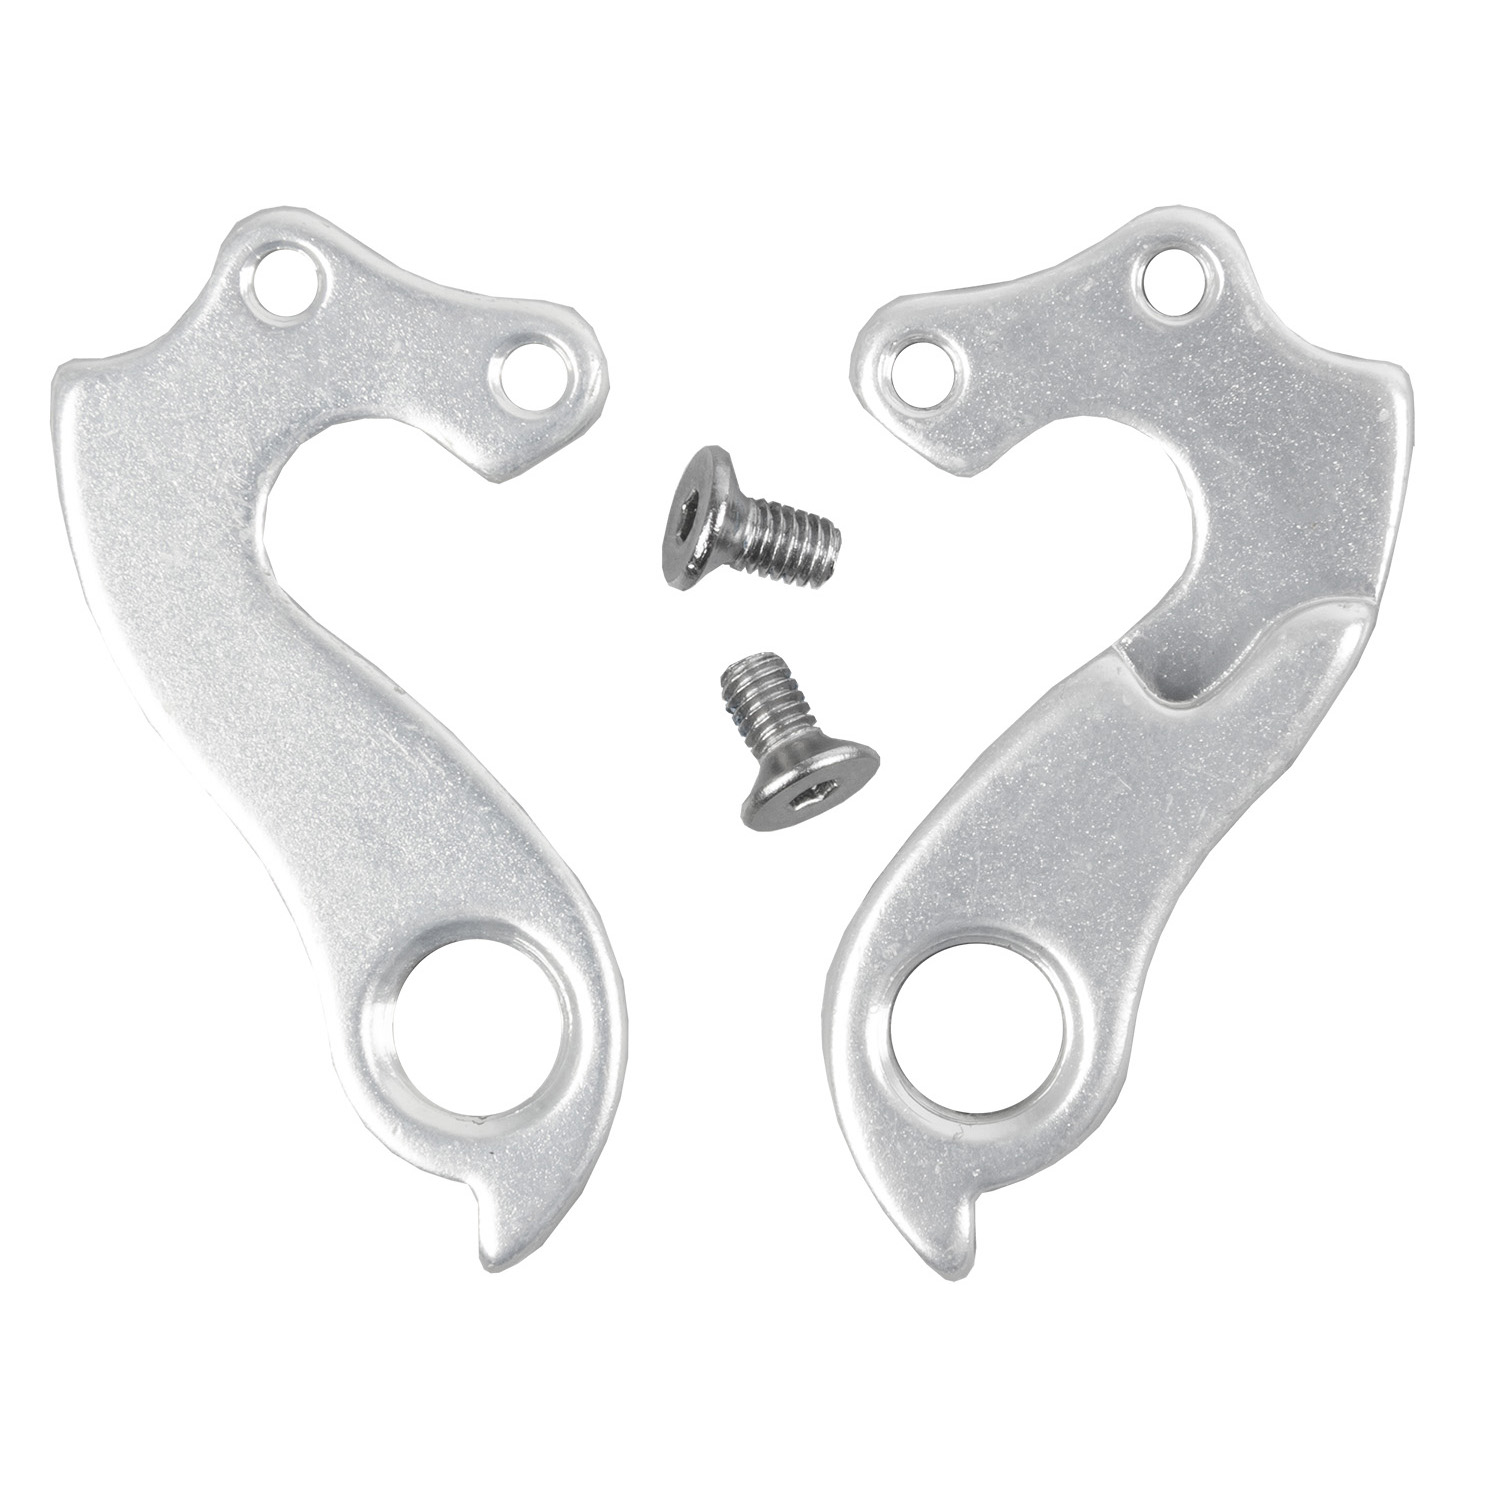 660857 S7 derailleur hanger – AVAILABLE IN SELECTED BIKE SHOPS